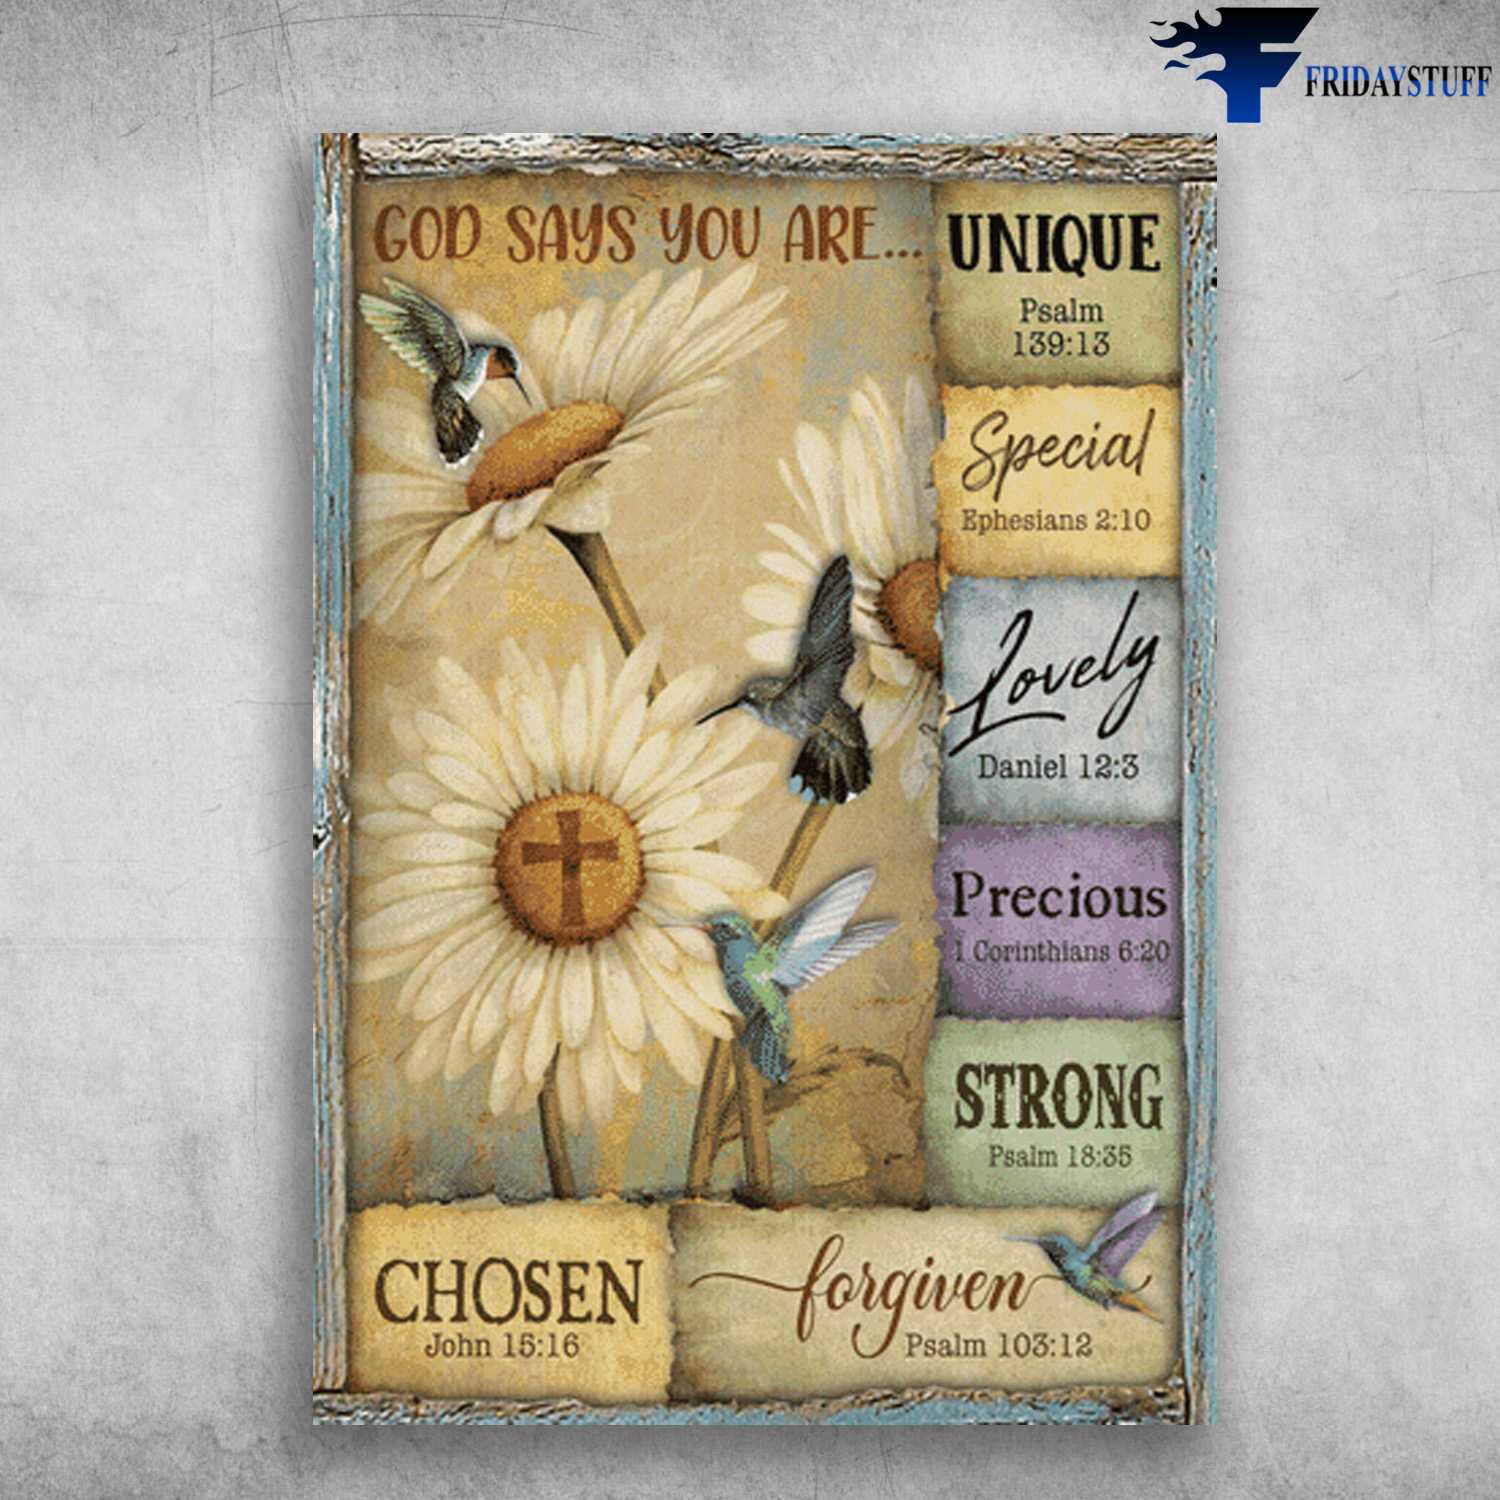 Hummingbird Poster, Hummingbird Flower, God Says You Are, Unique, Special, Lovely, Precious